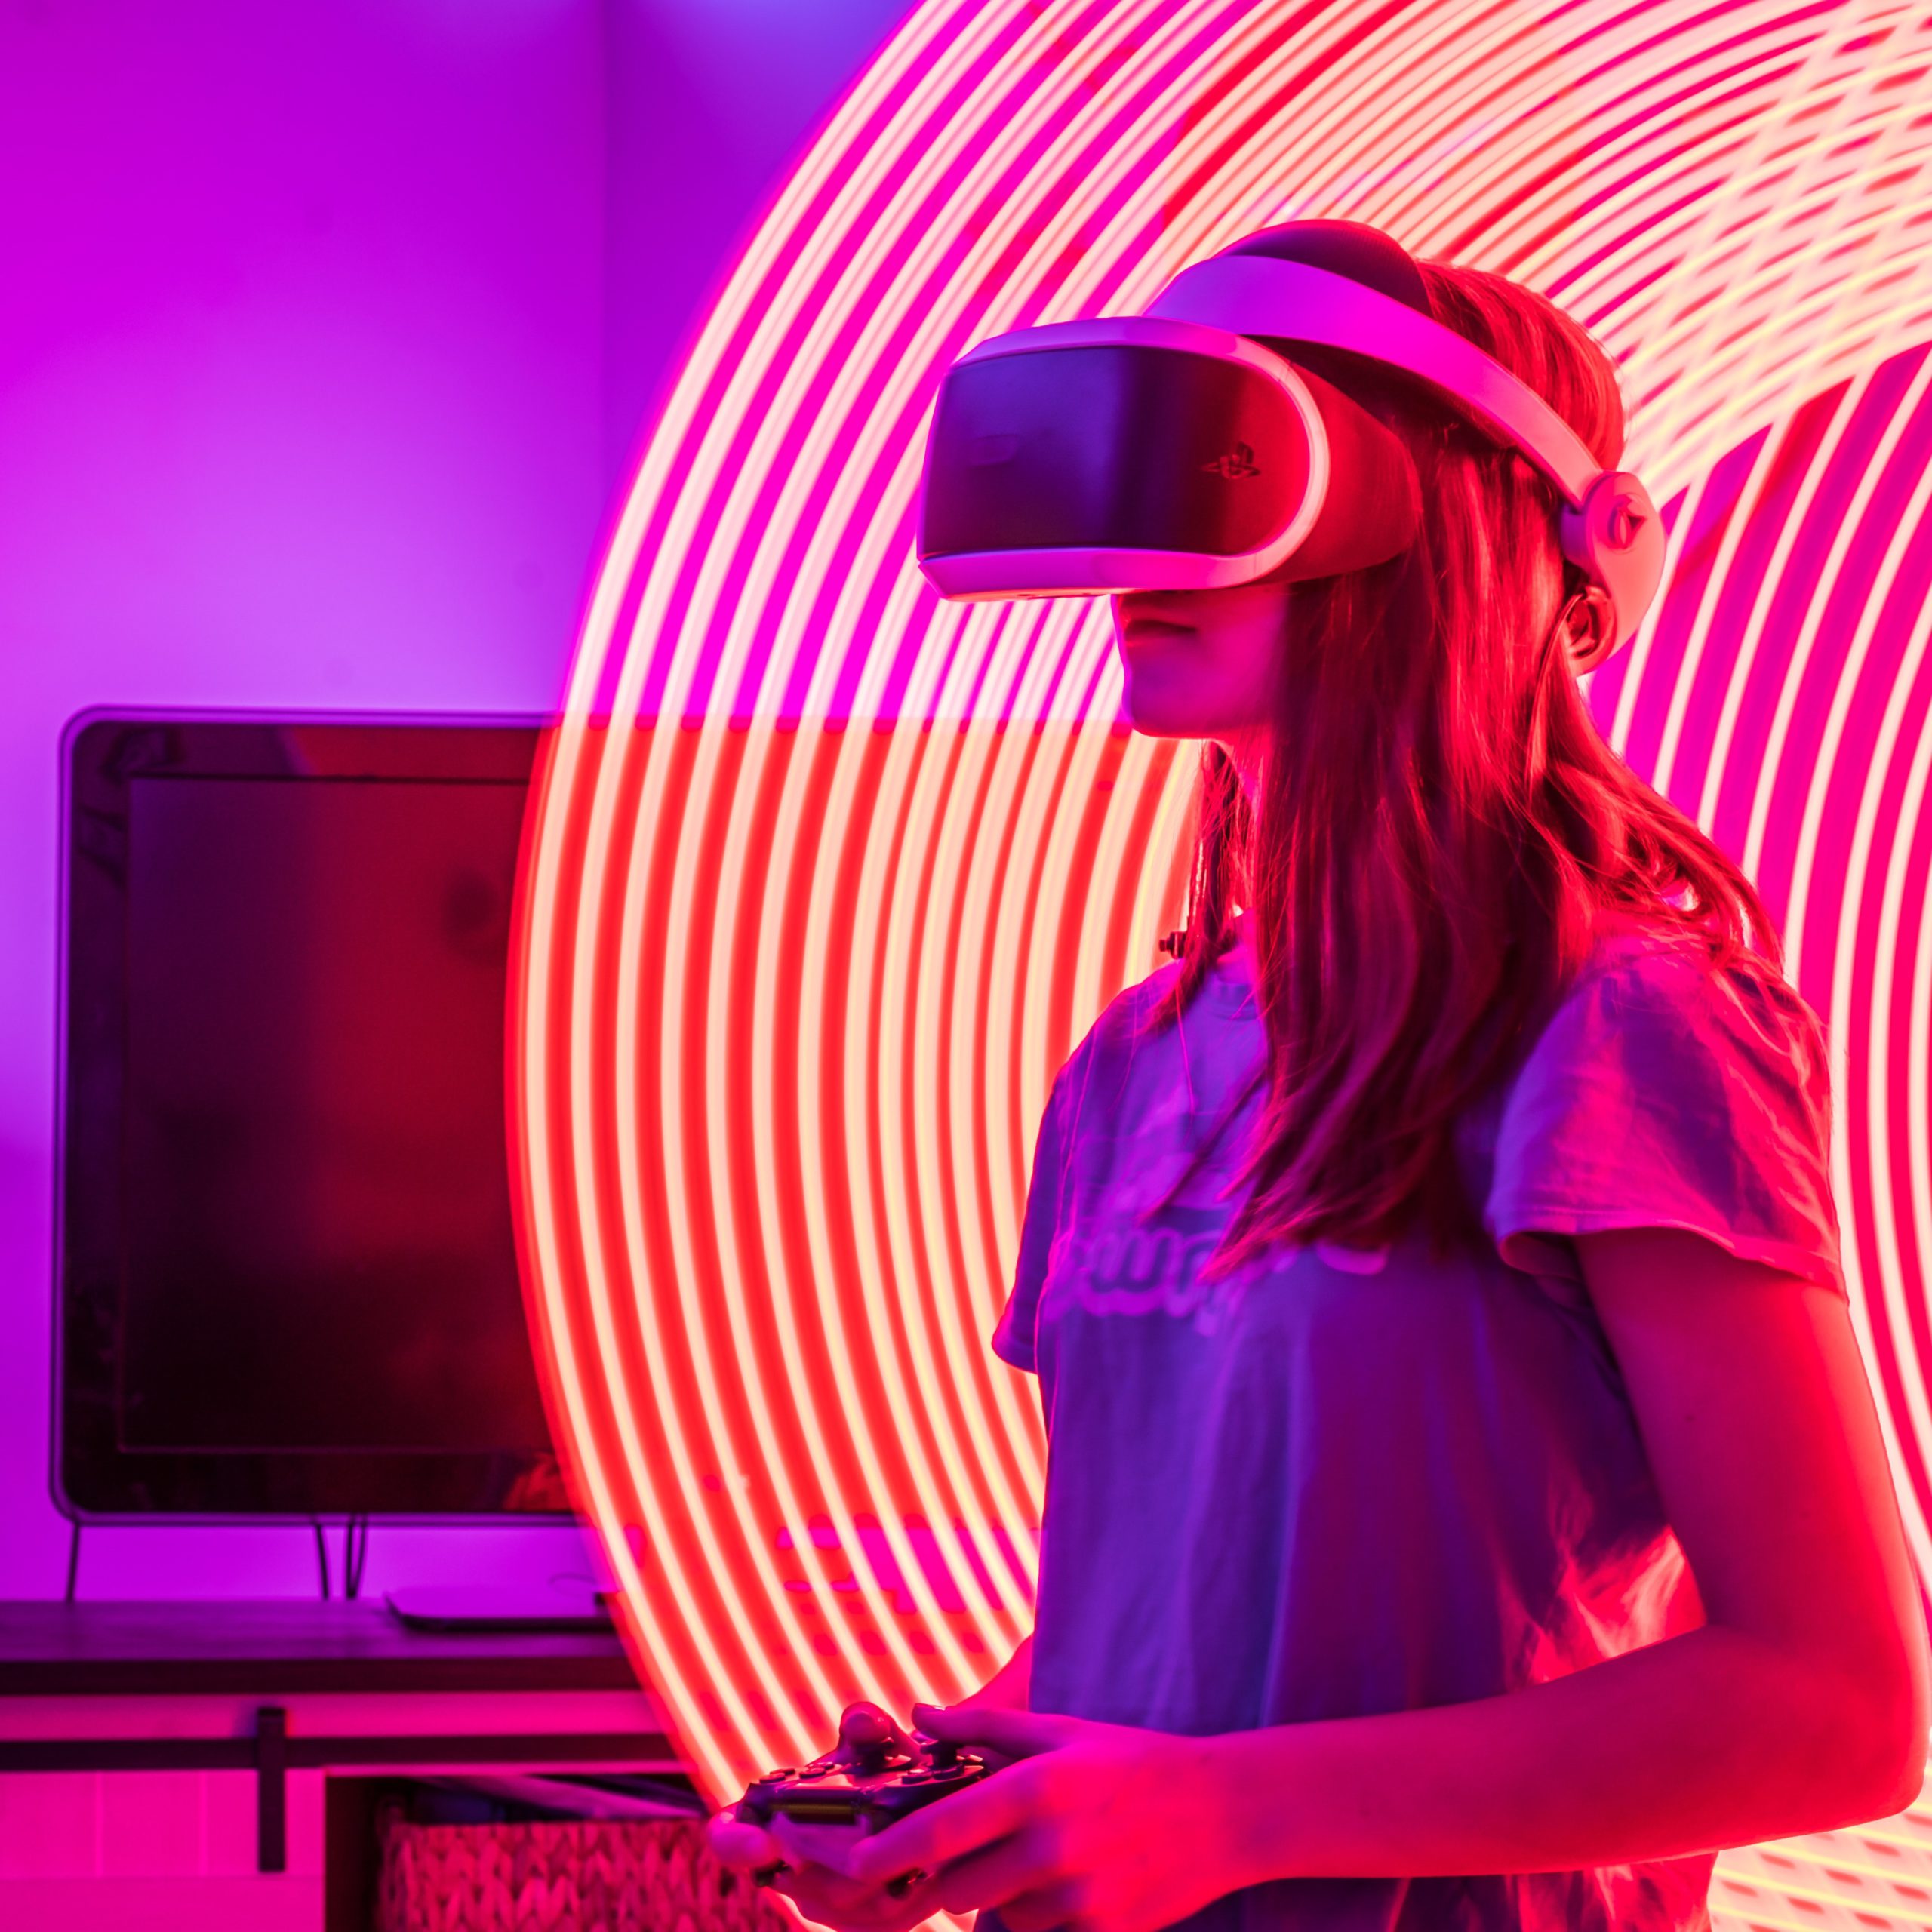 Certificate Course in Immersive VR & 360 Video Production (OFFLINE)